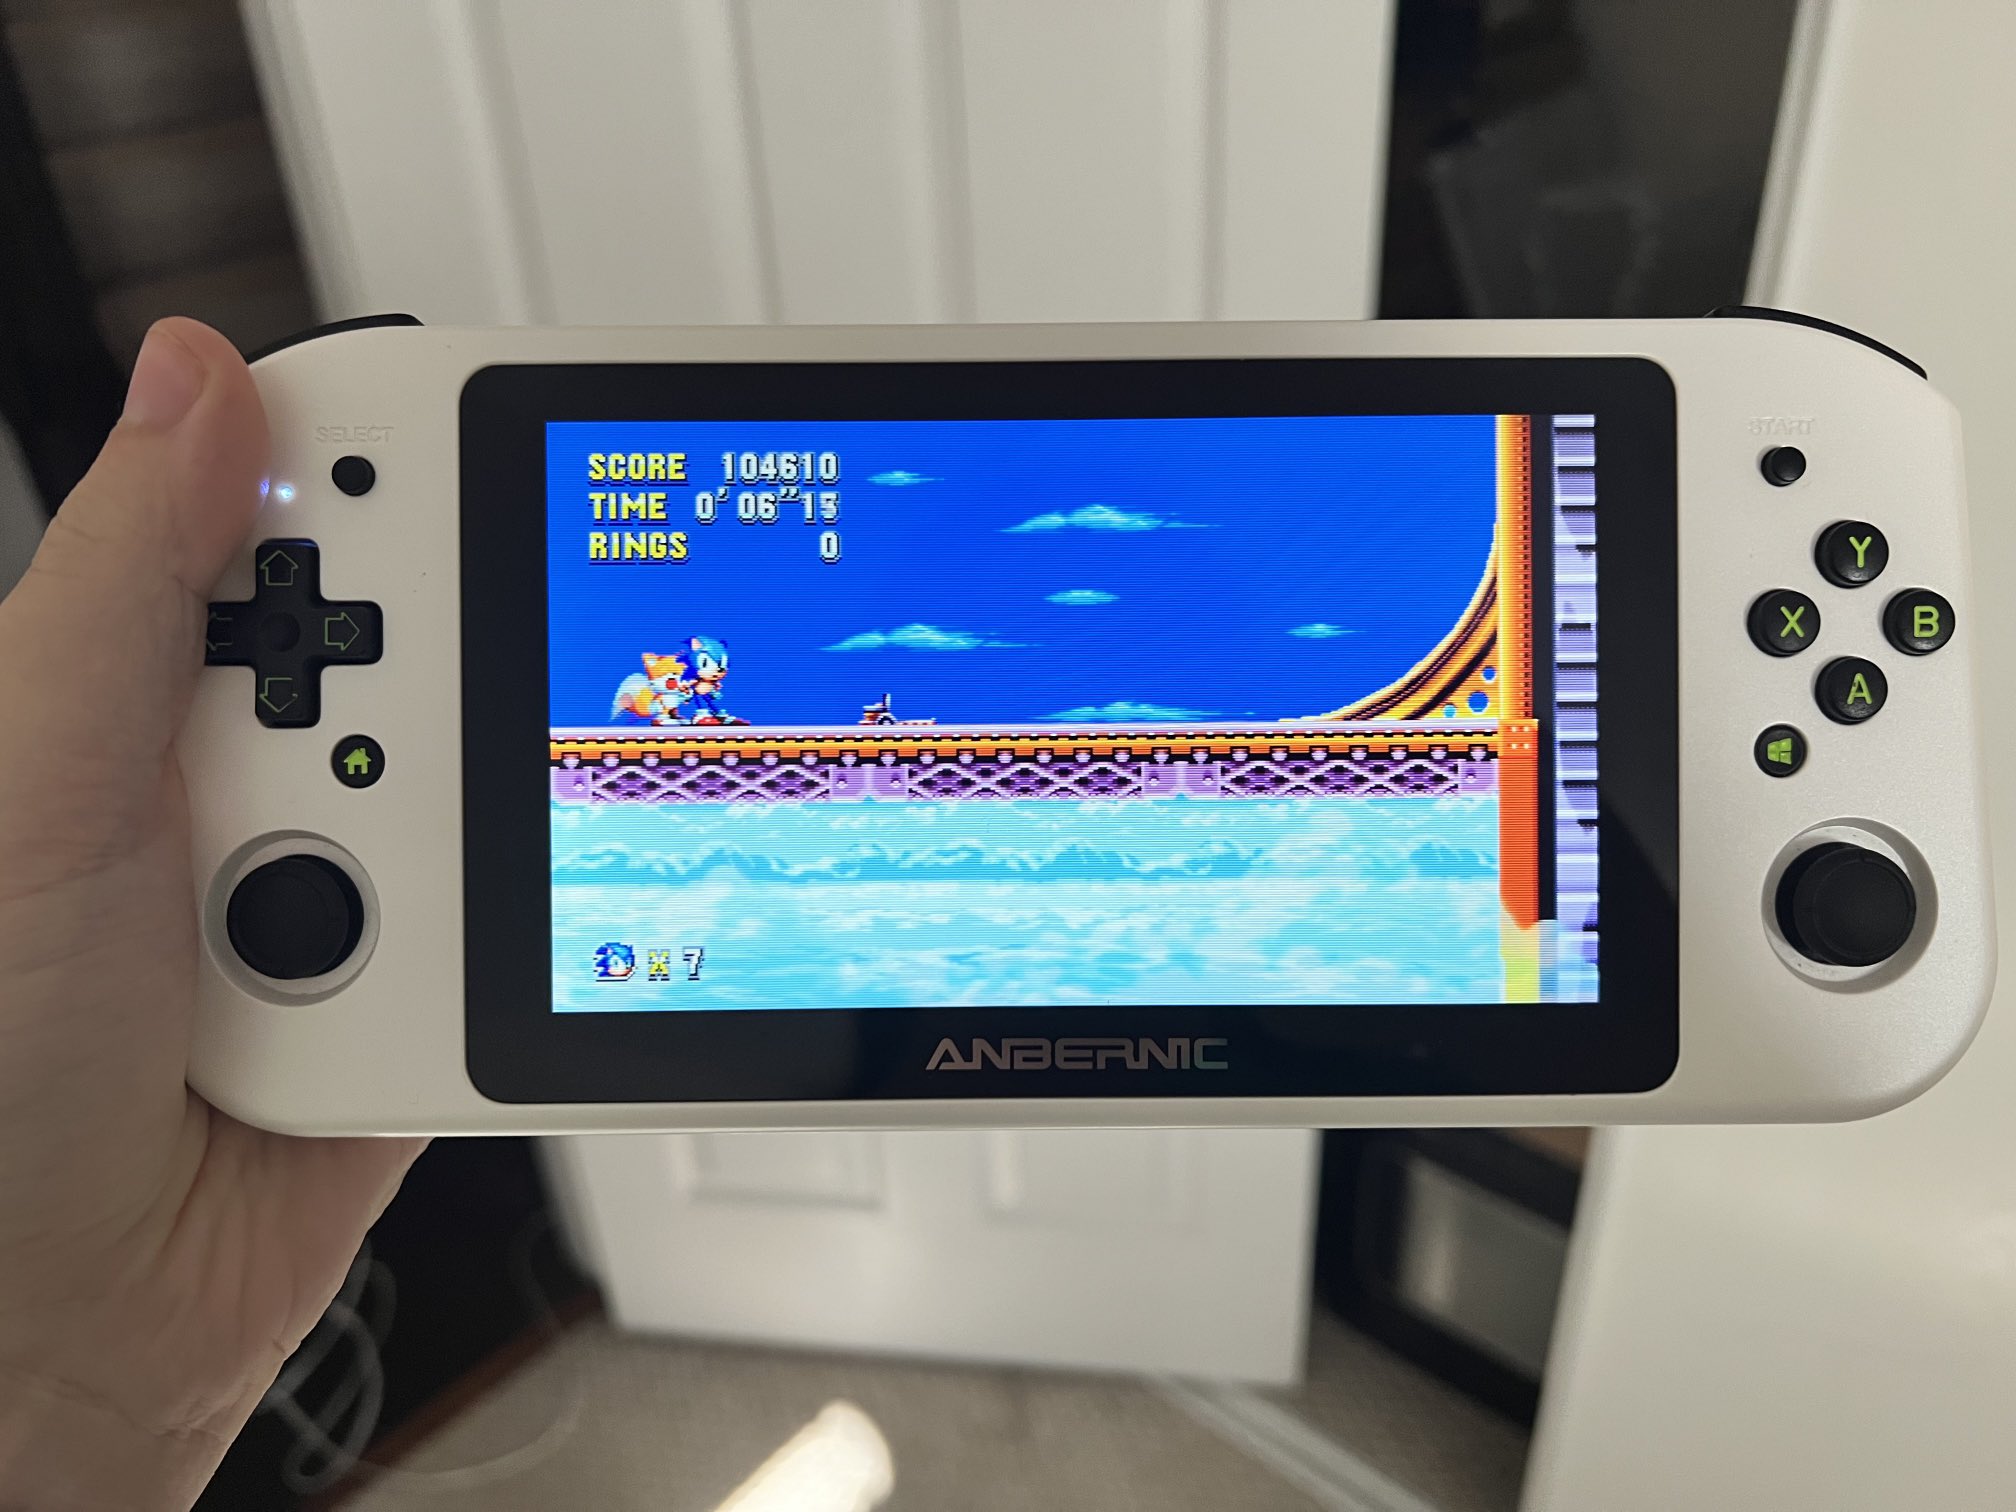 The device in action playing Sonic Mania